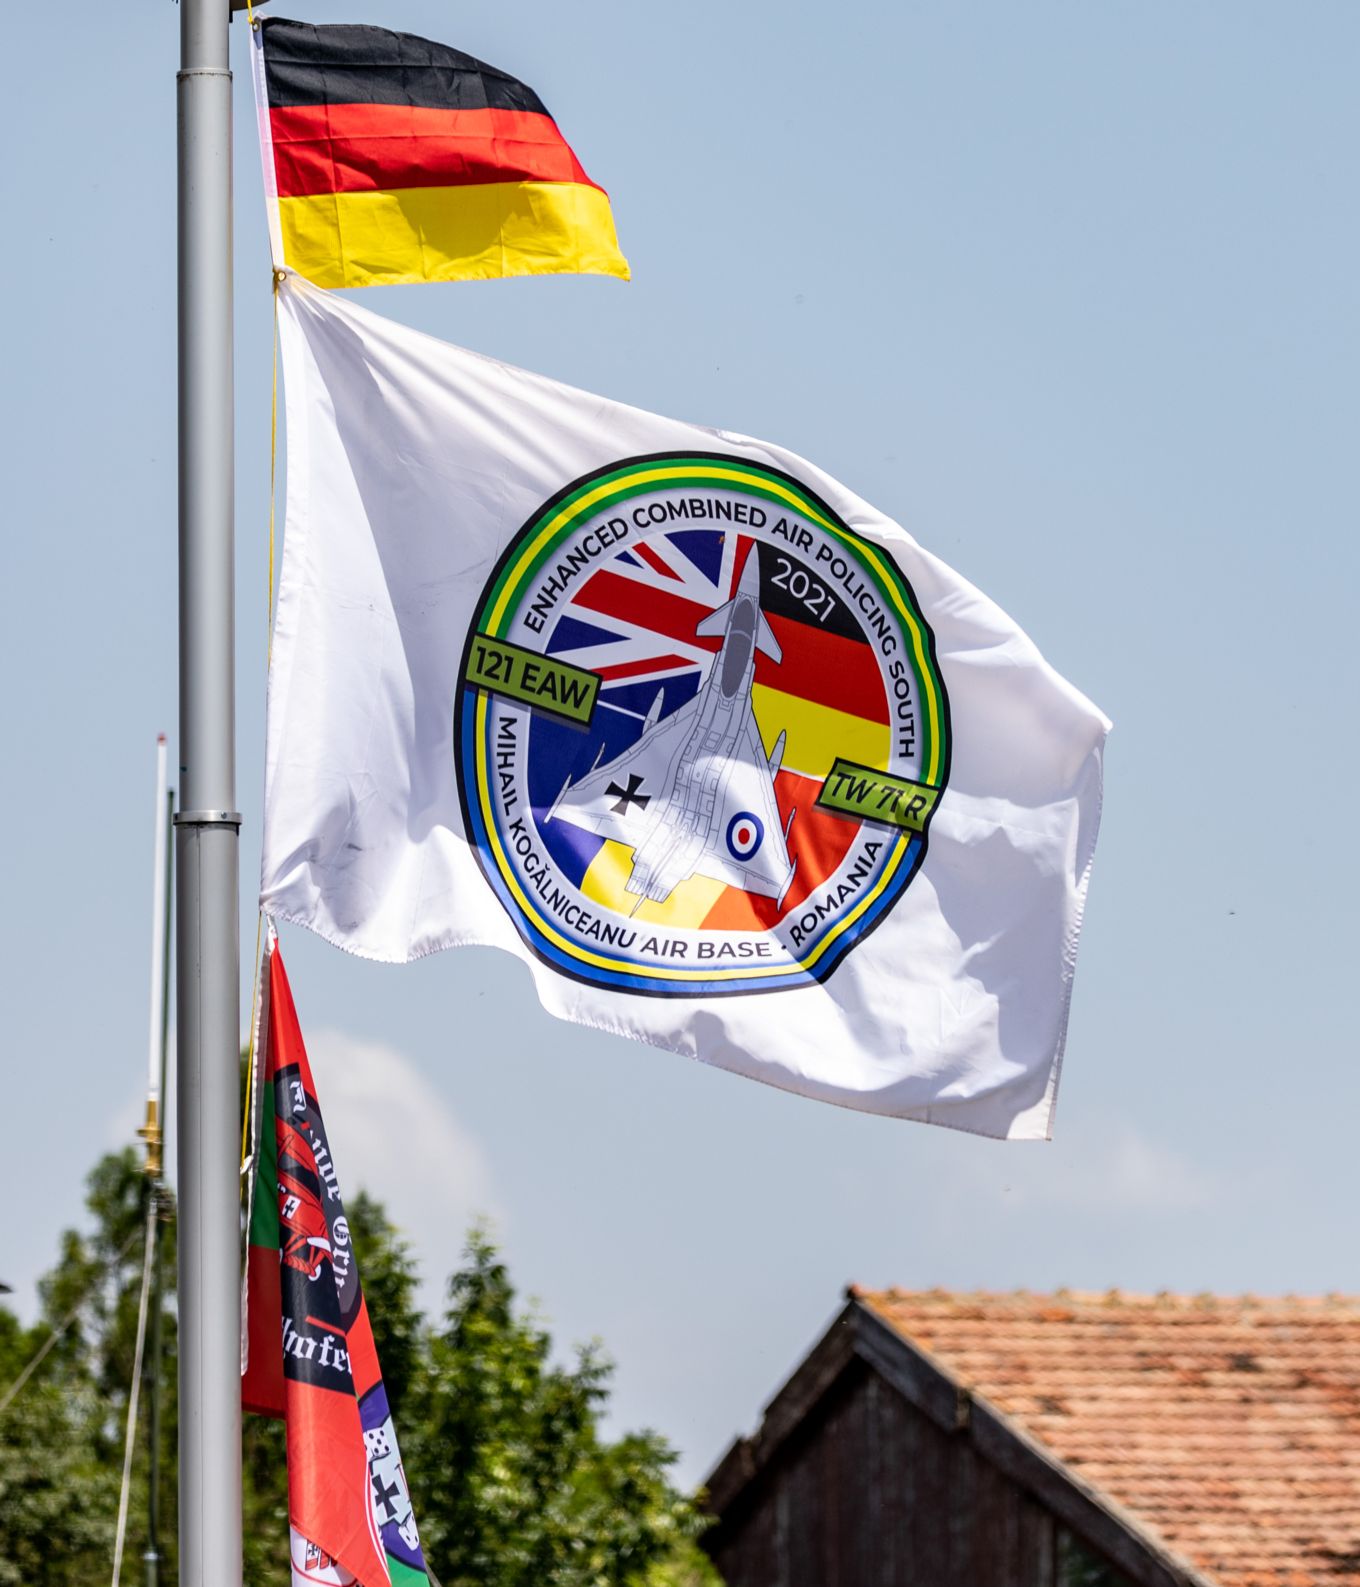 The special joint detachment flag.